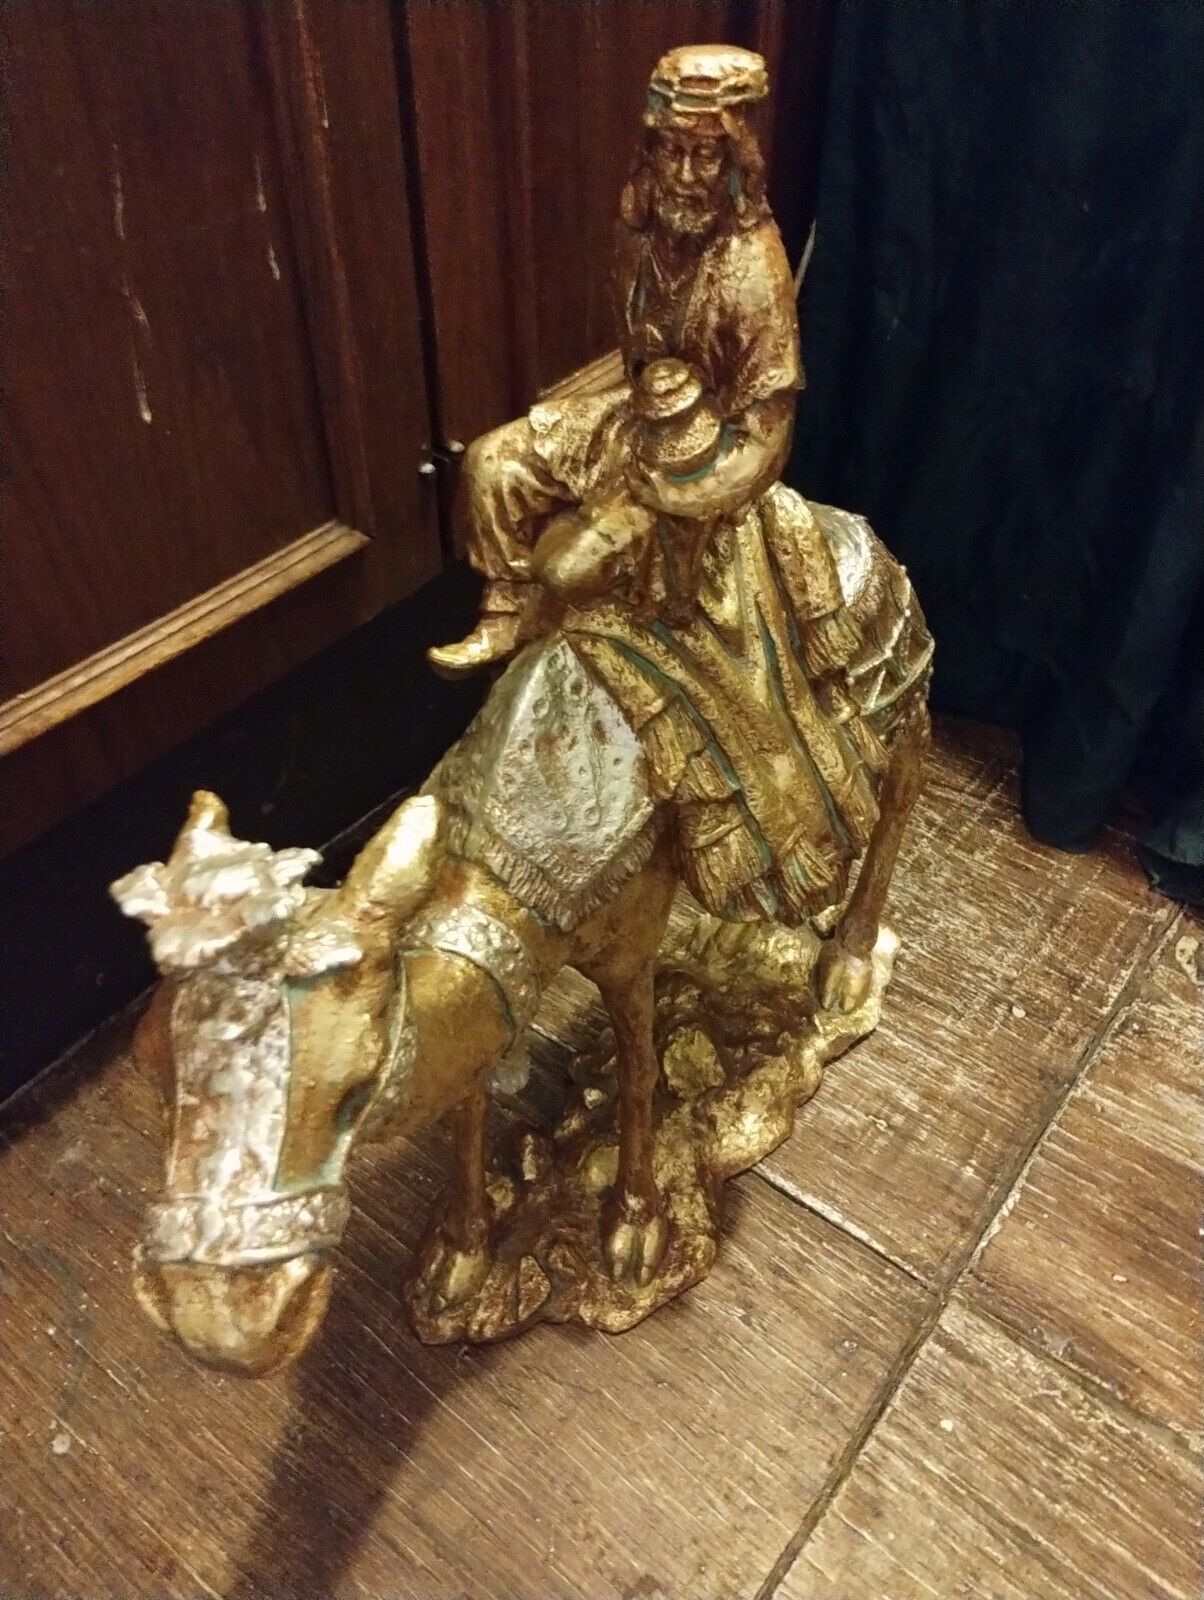 wise man riding camel heavy made of some composite material gold tone, 2ft x 2ft